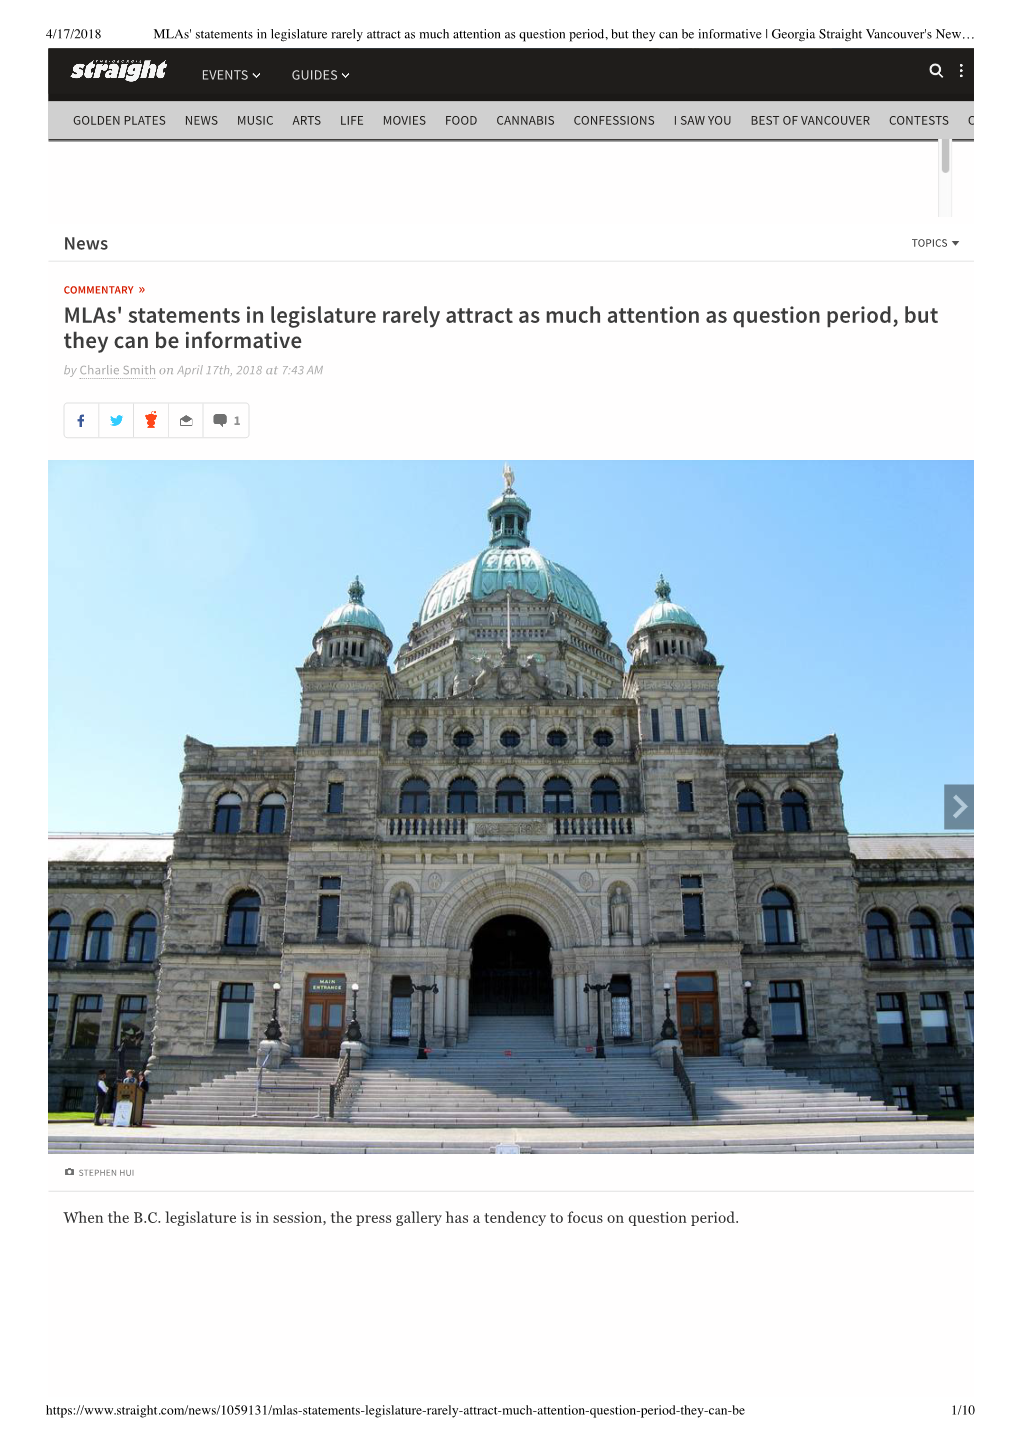 Mlas' Statements in Legislature Rarely ...Ancouver's News & Entertainment